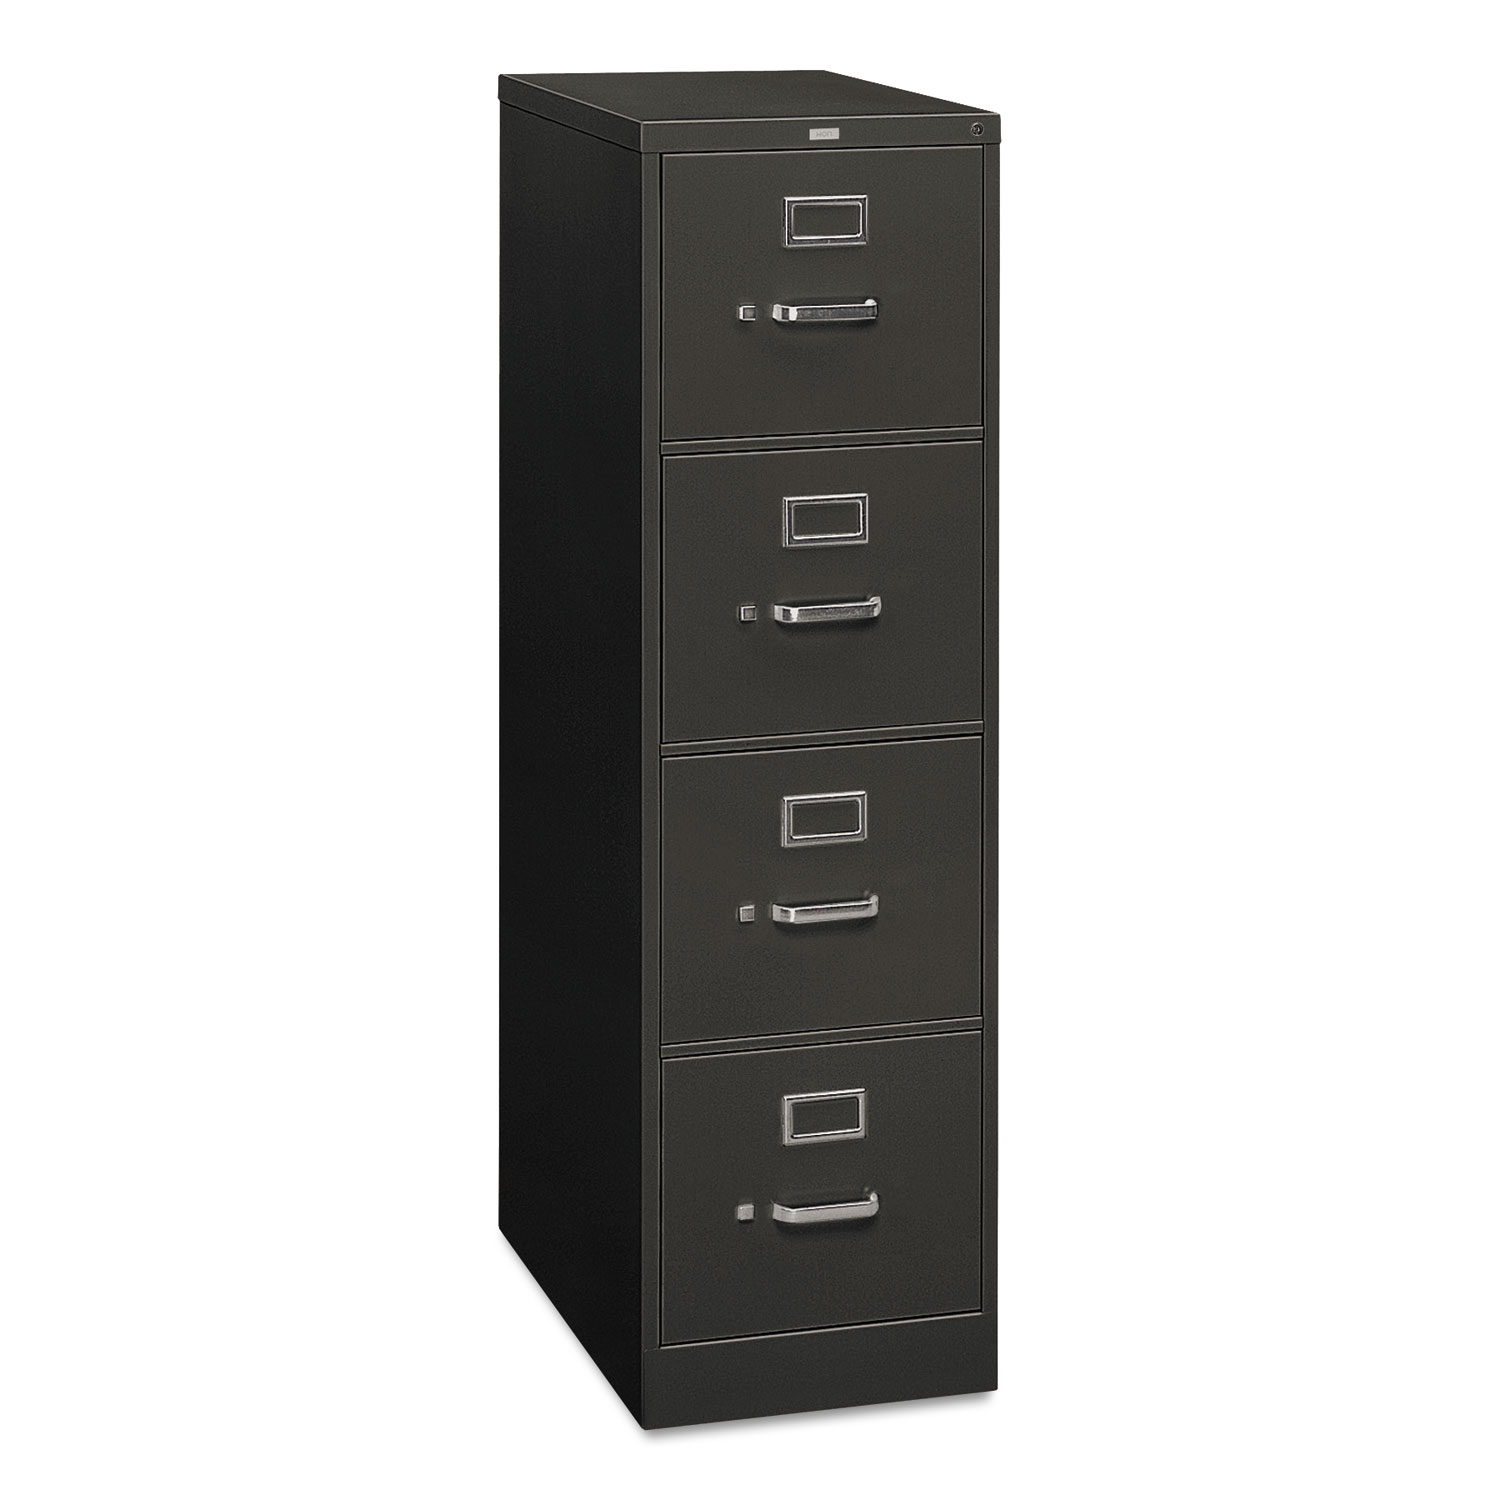  HON H314.P.S 310 Series Four-Drawer Full-Suspension File, Letter, 15w x 26.5d x 52h, Charcoal (HON314PS) 